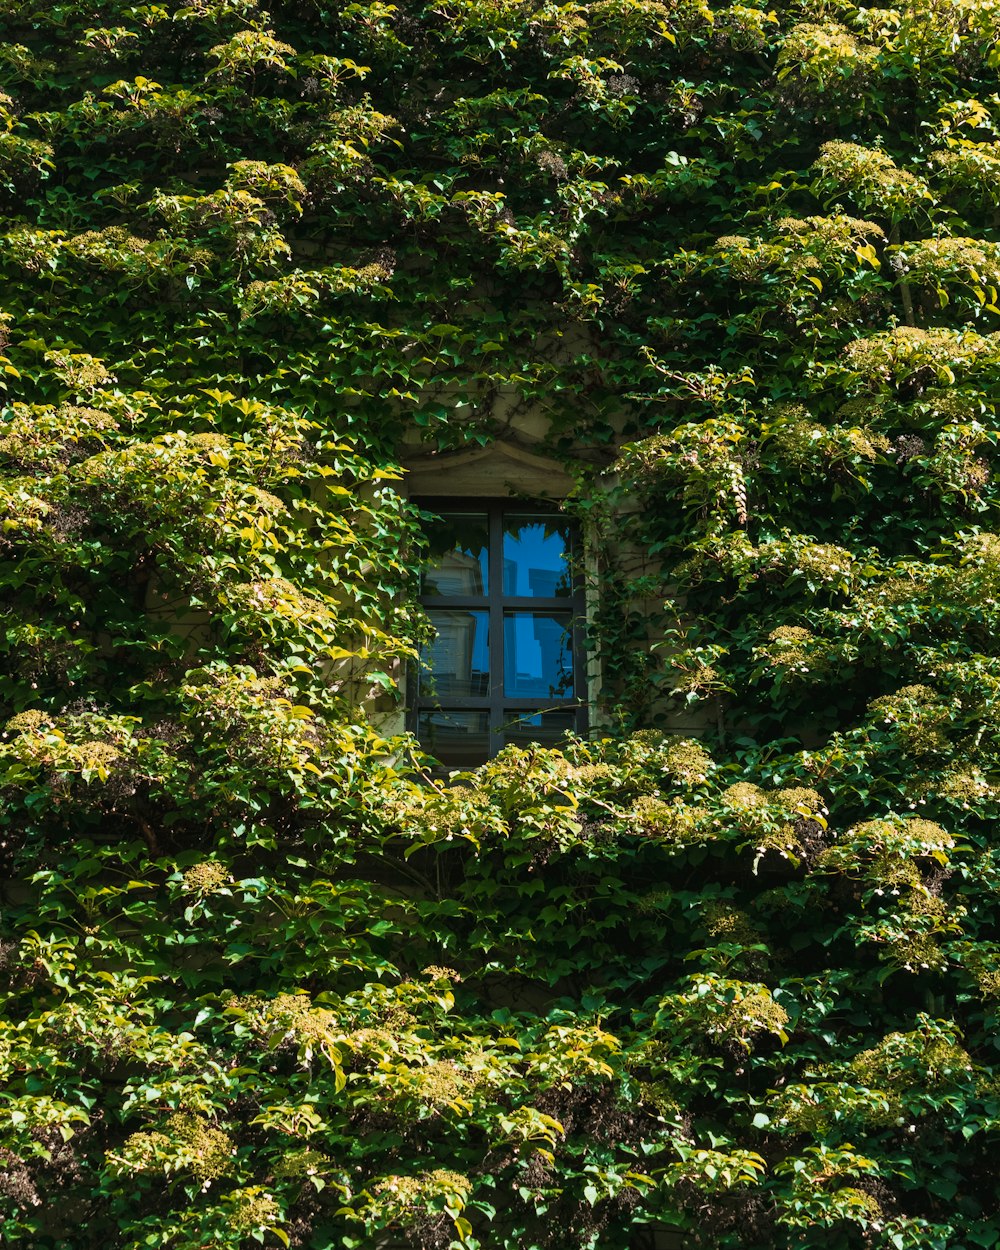 a window in the side of a building covered in vines